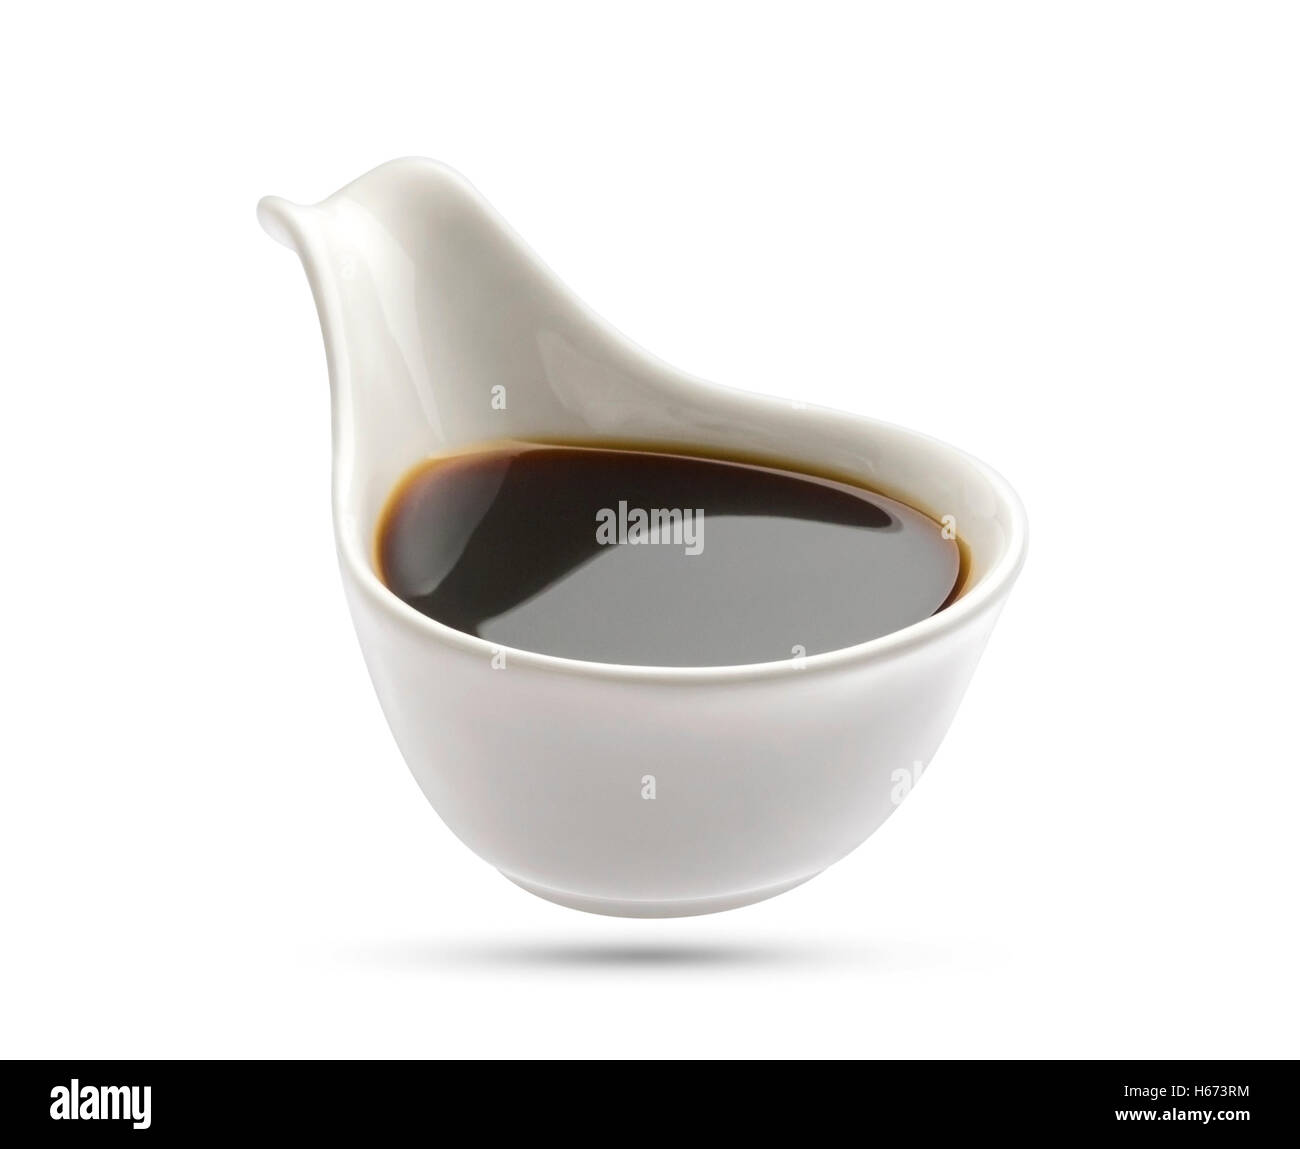 bowl of soy sauce Stock Photo